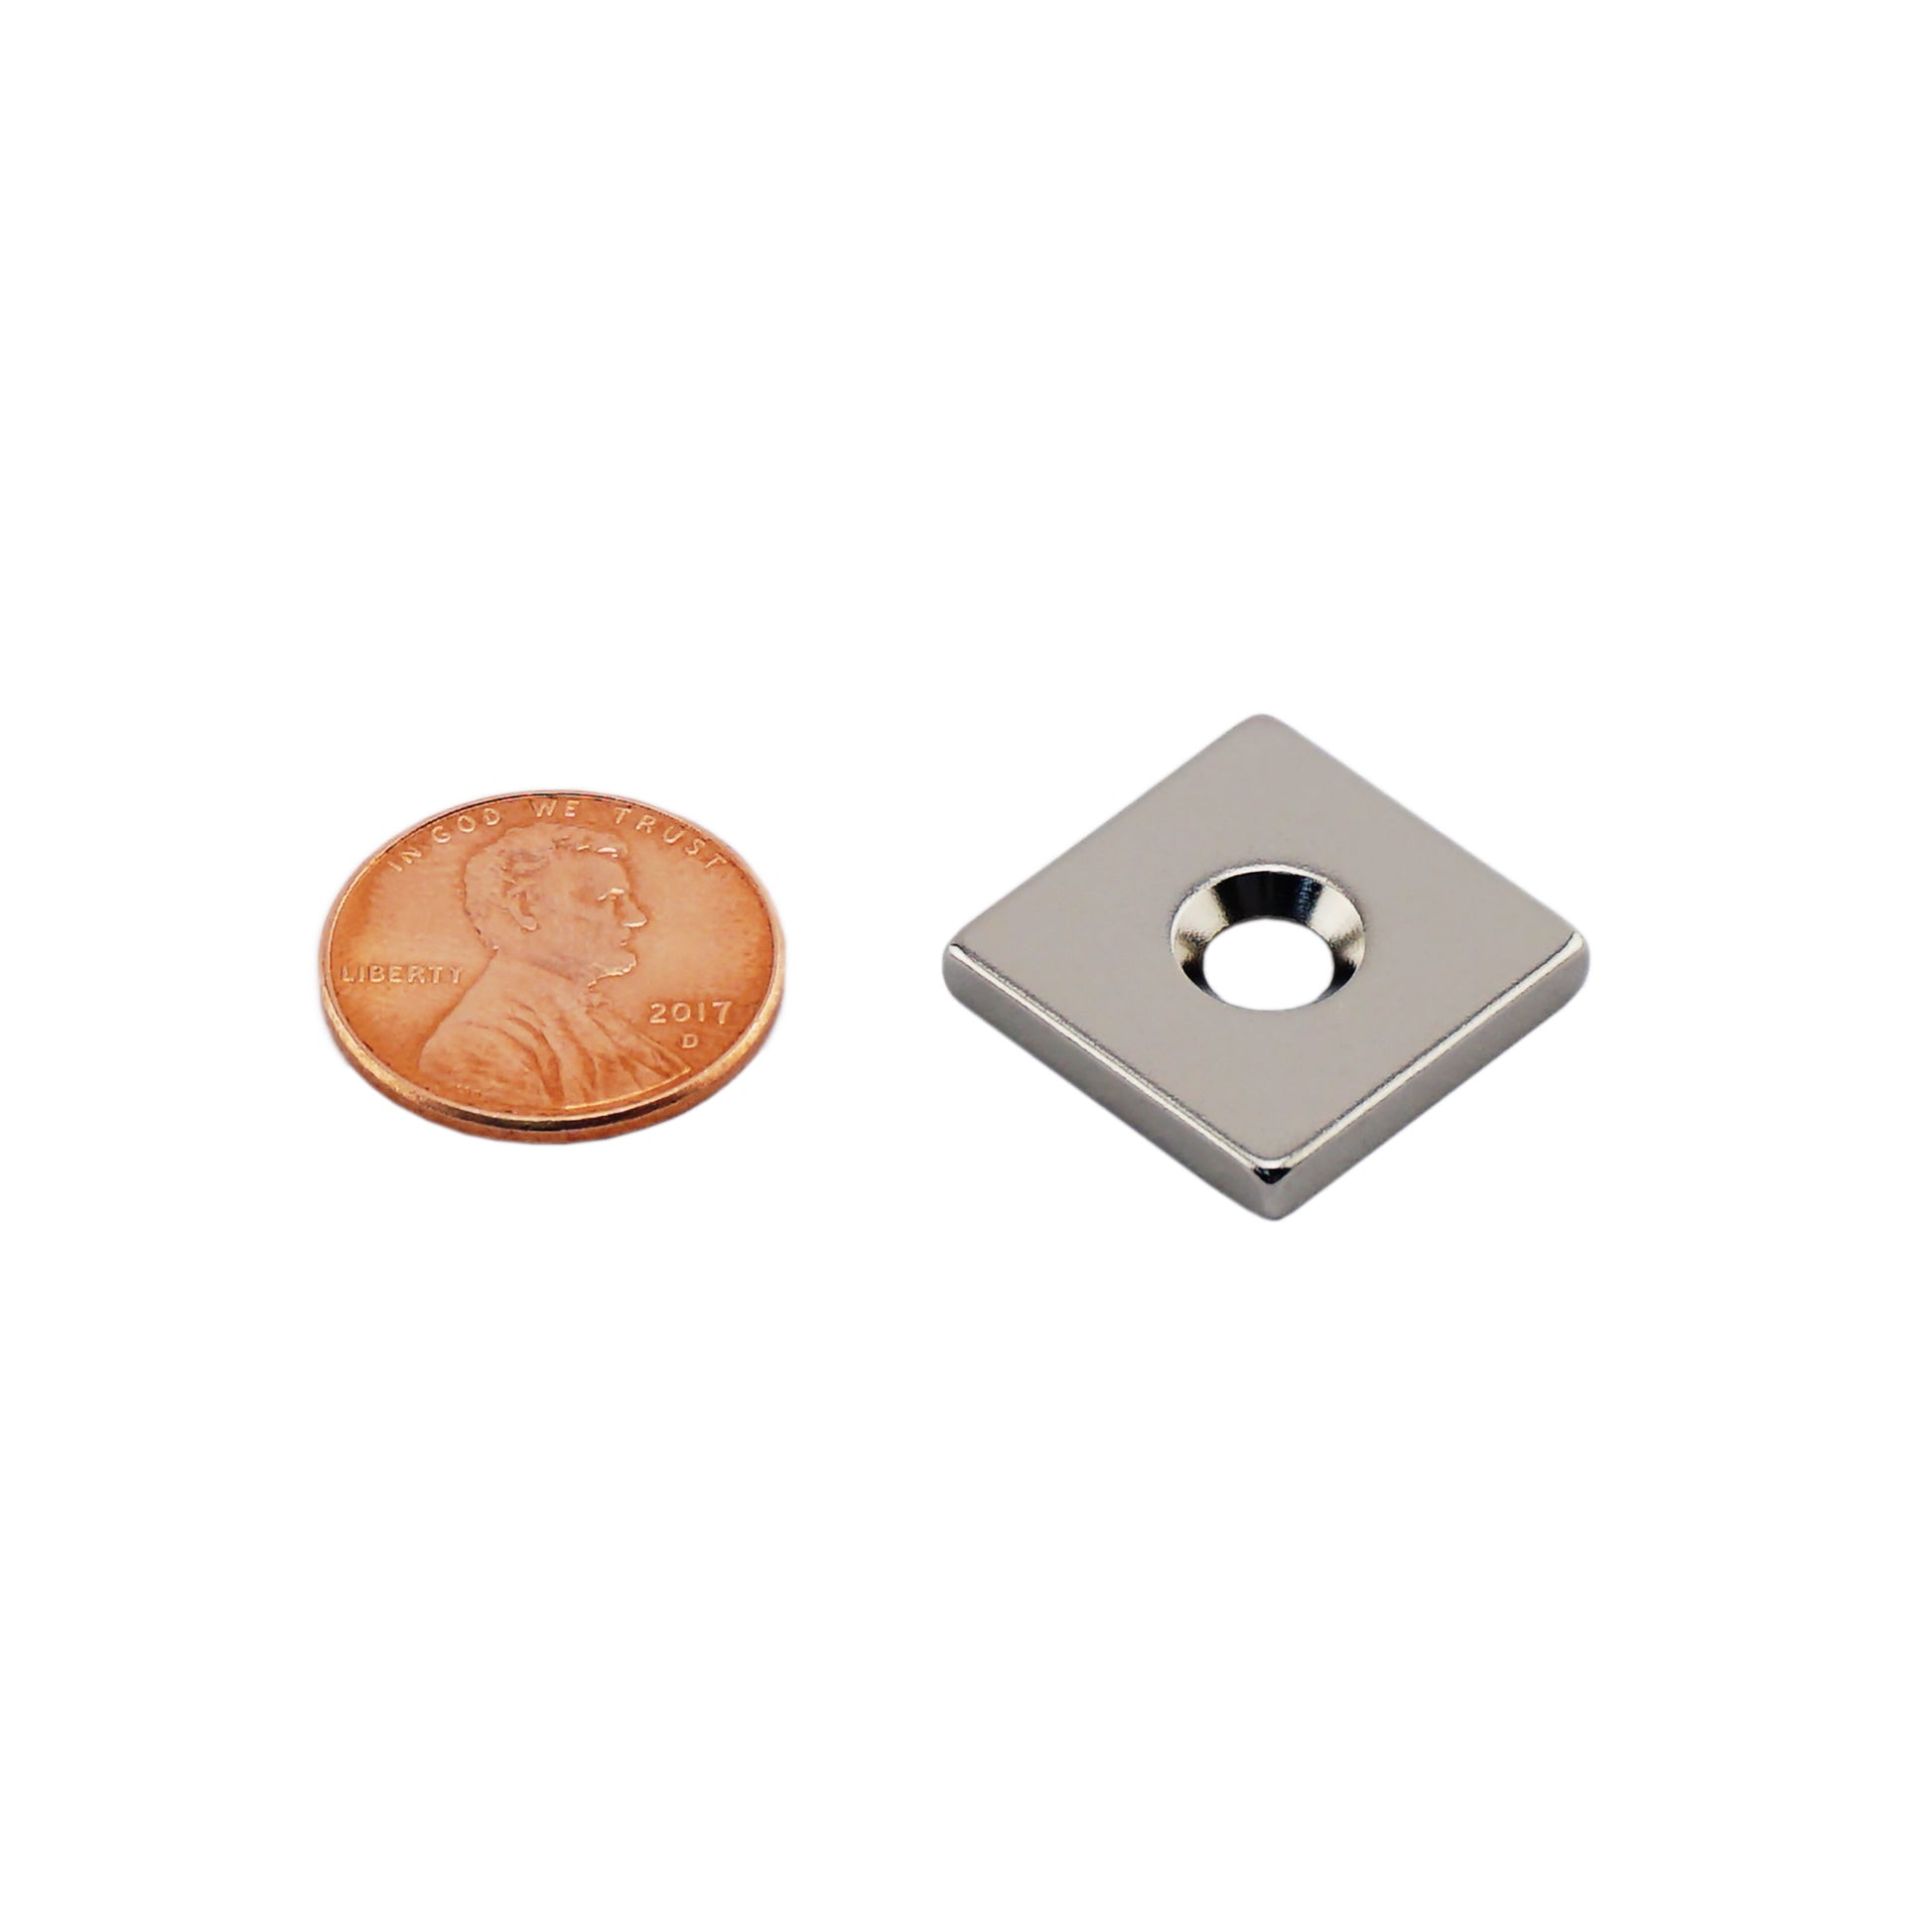 Load image into Gallery viewer, NB001219NCTS Neodymium Countersunk Block Magnet - Compared to Penny for Size Reference